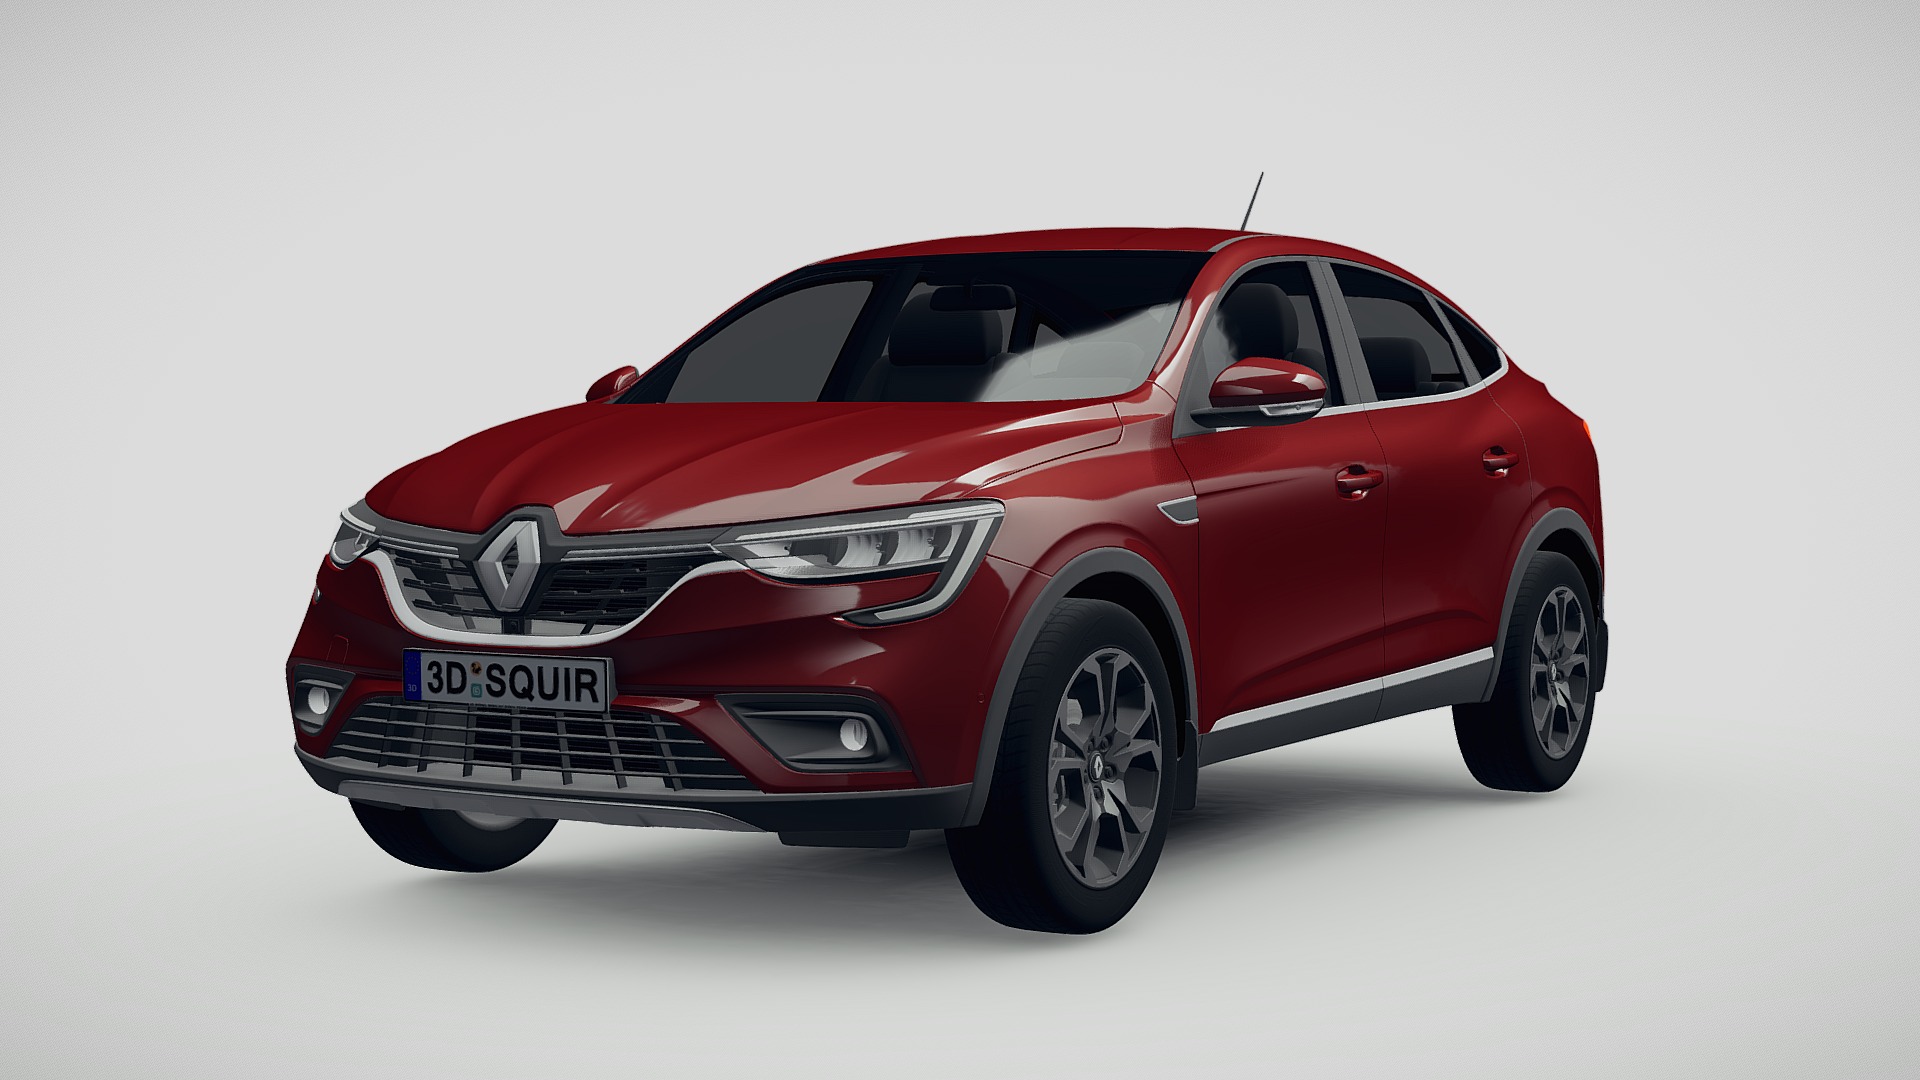 3D model Renault Arkana 2020 - This is a 3D model of the Renault Arkana 2020. The 3D model is about a red car with a white background with Holden Arboretum in the background.